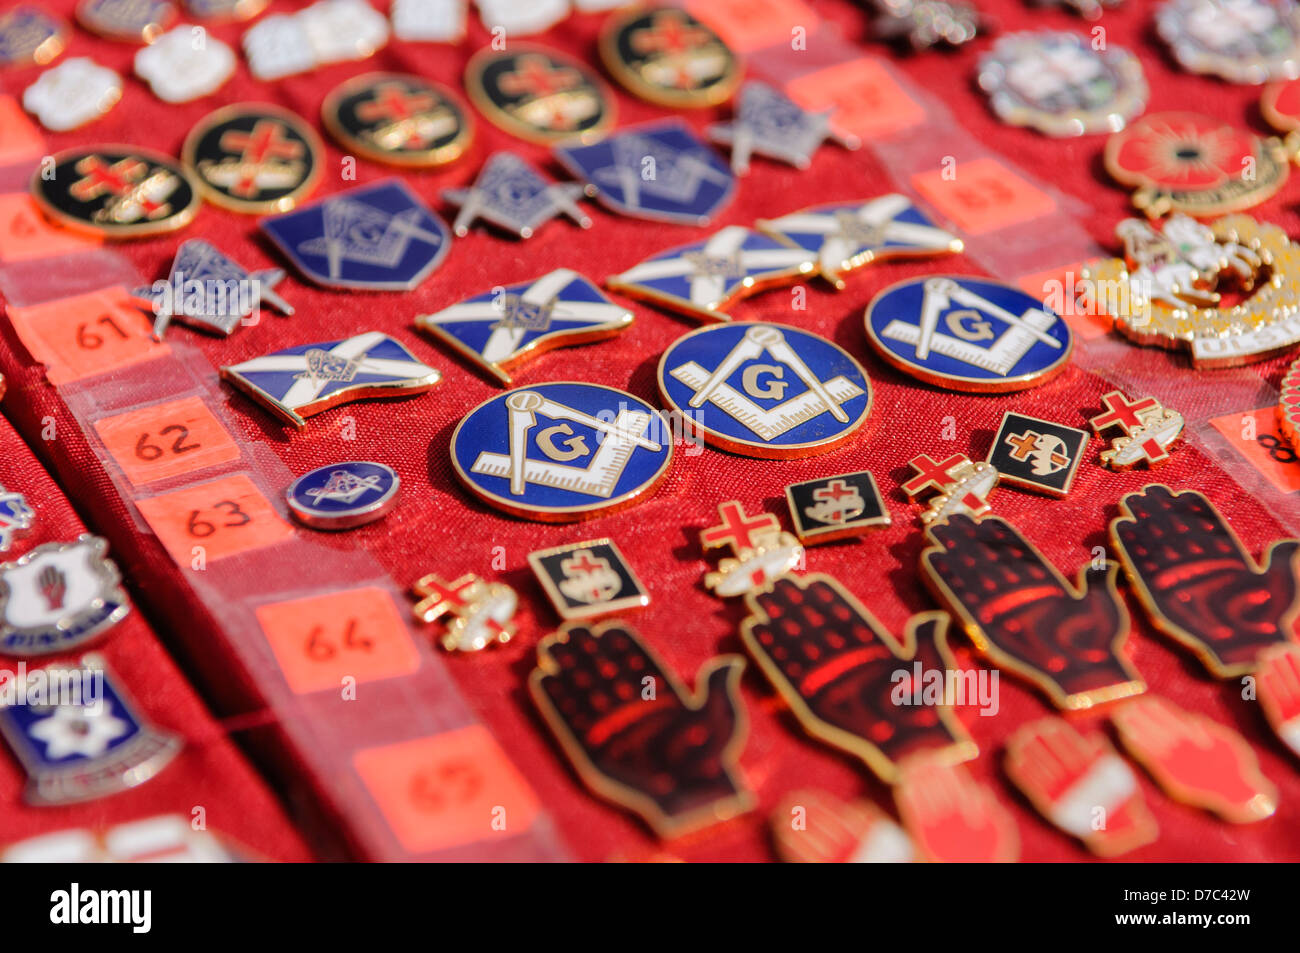 Masonic and Loyalist/Unionist badges on sale at a market stall Stock Photo